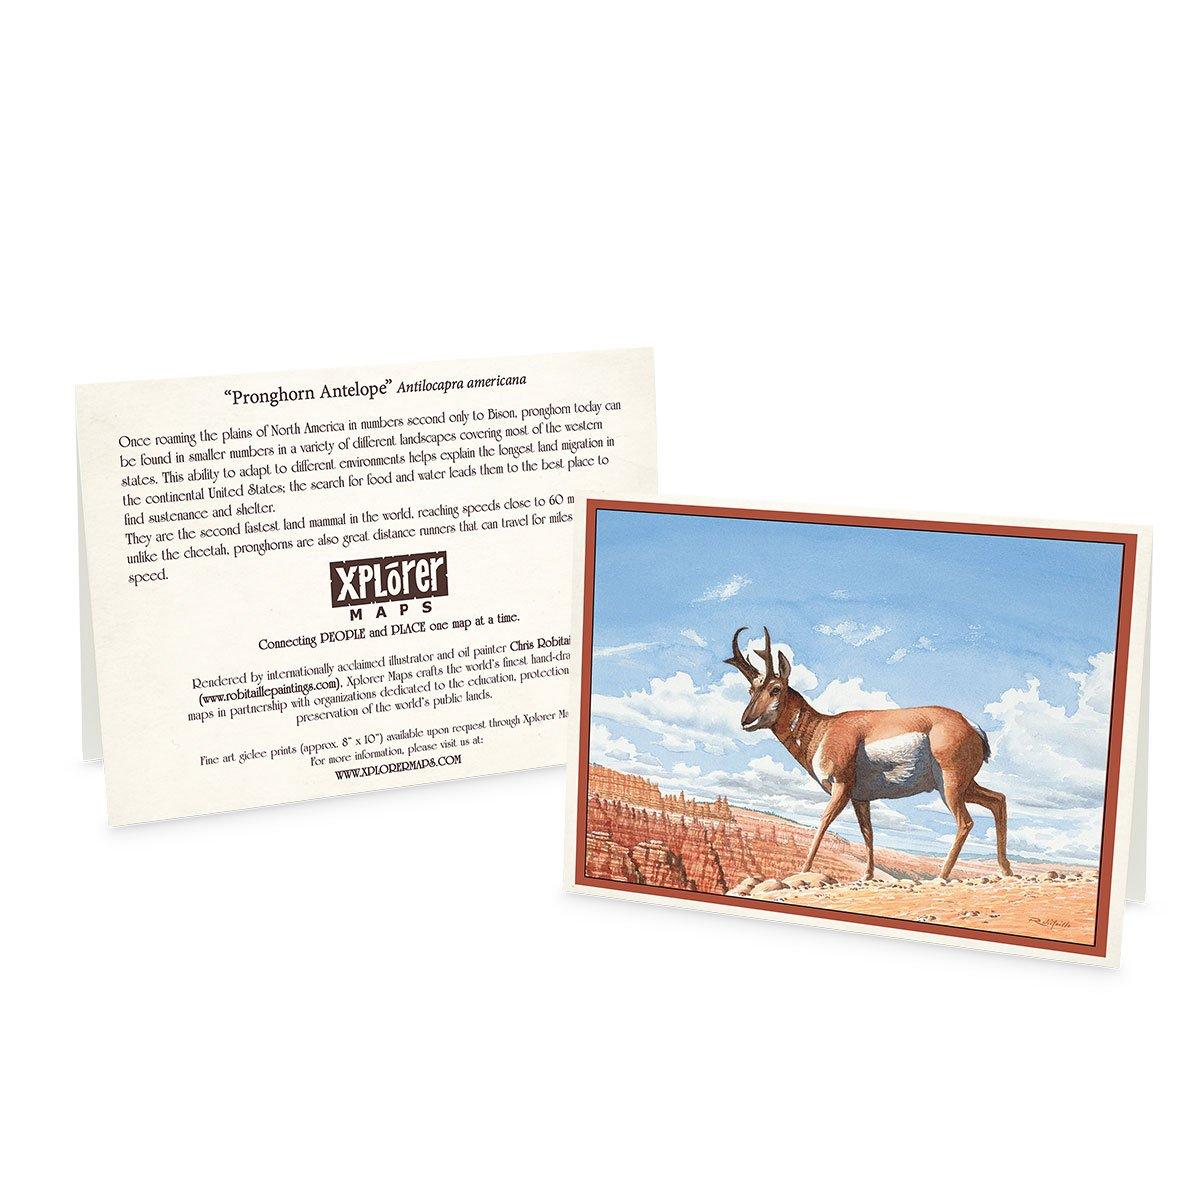 Bryce Canyon National Park Map Blank Notecards on earth tone colors featuring canyons, horseback, hoodoos, Rim Trail, Sunrise Point, Sunset Point, Inspiration Point and Bryce Point.